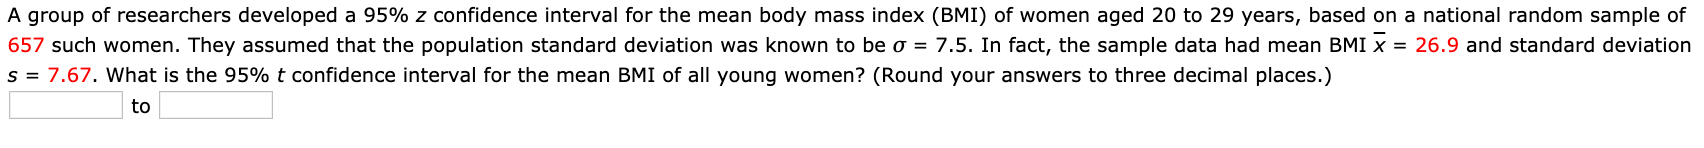 A group of researchers developed a 95% z confidence interval for the mean body mass index (BMI) of women aged 20 to 29 years, based on a national random sample of
657 such women. They assumed that the population standard deviation was known to be o = 7.5. In fact, the sample data had mean BMI x = 26.9 and standard deviation
s = 7.67. What is the 95% t confidence interval for the mean BMI of all young women? (Round your answers to three decimal places.)
to
